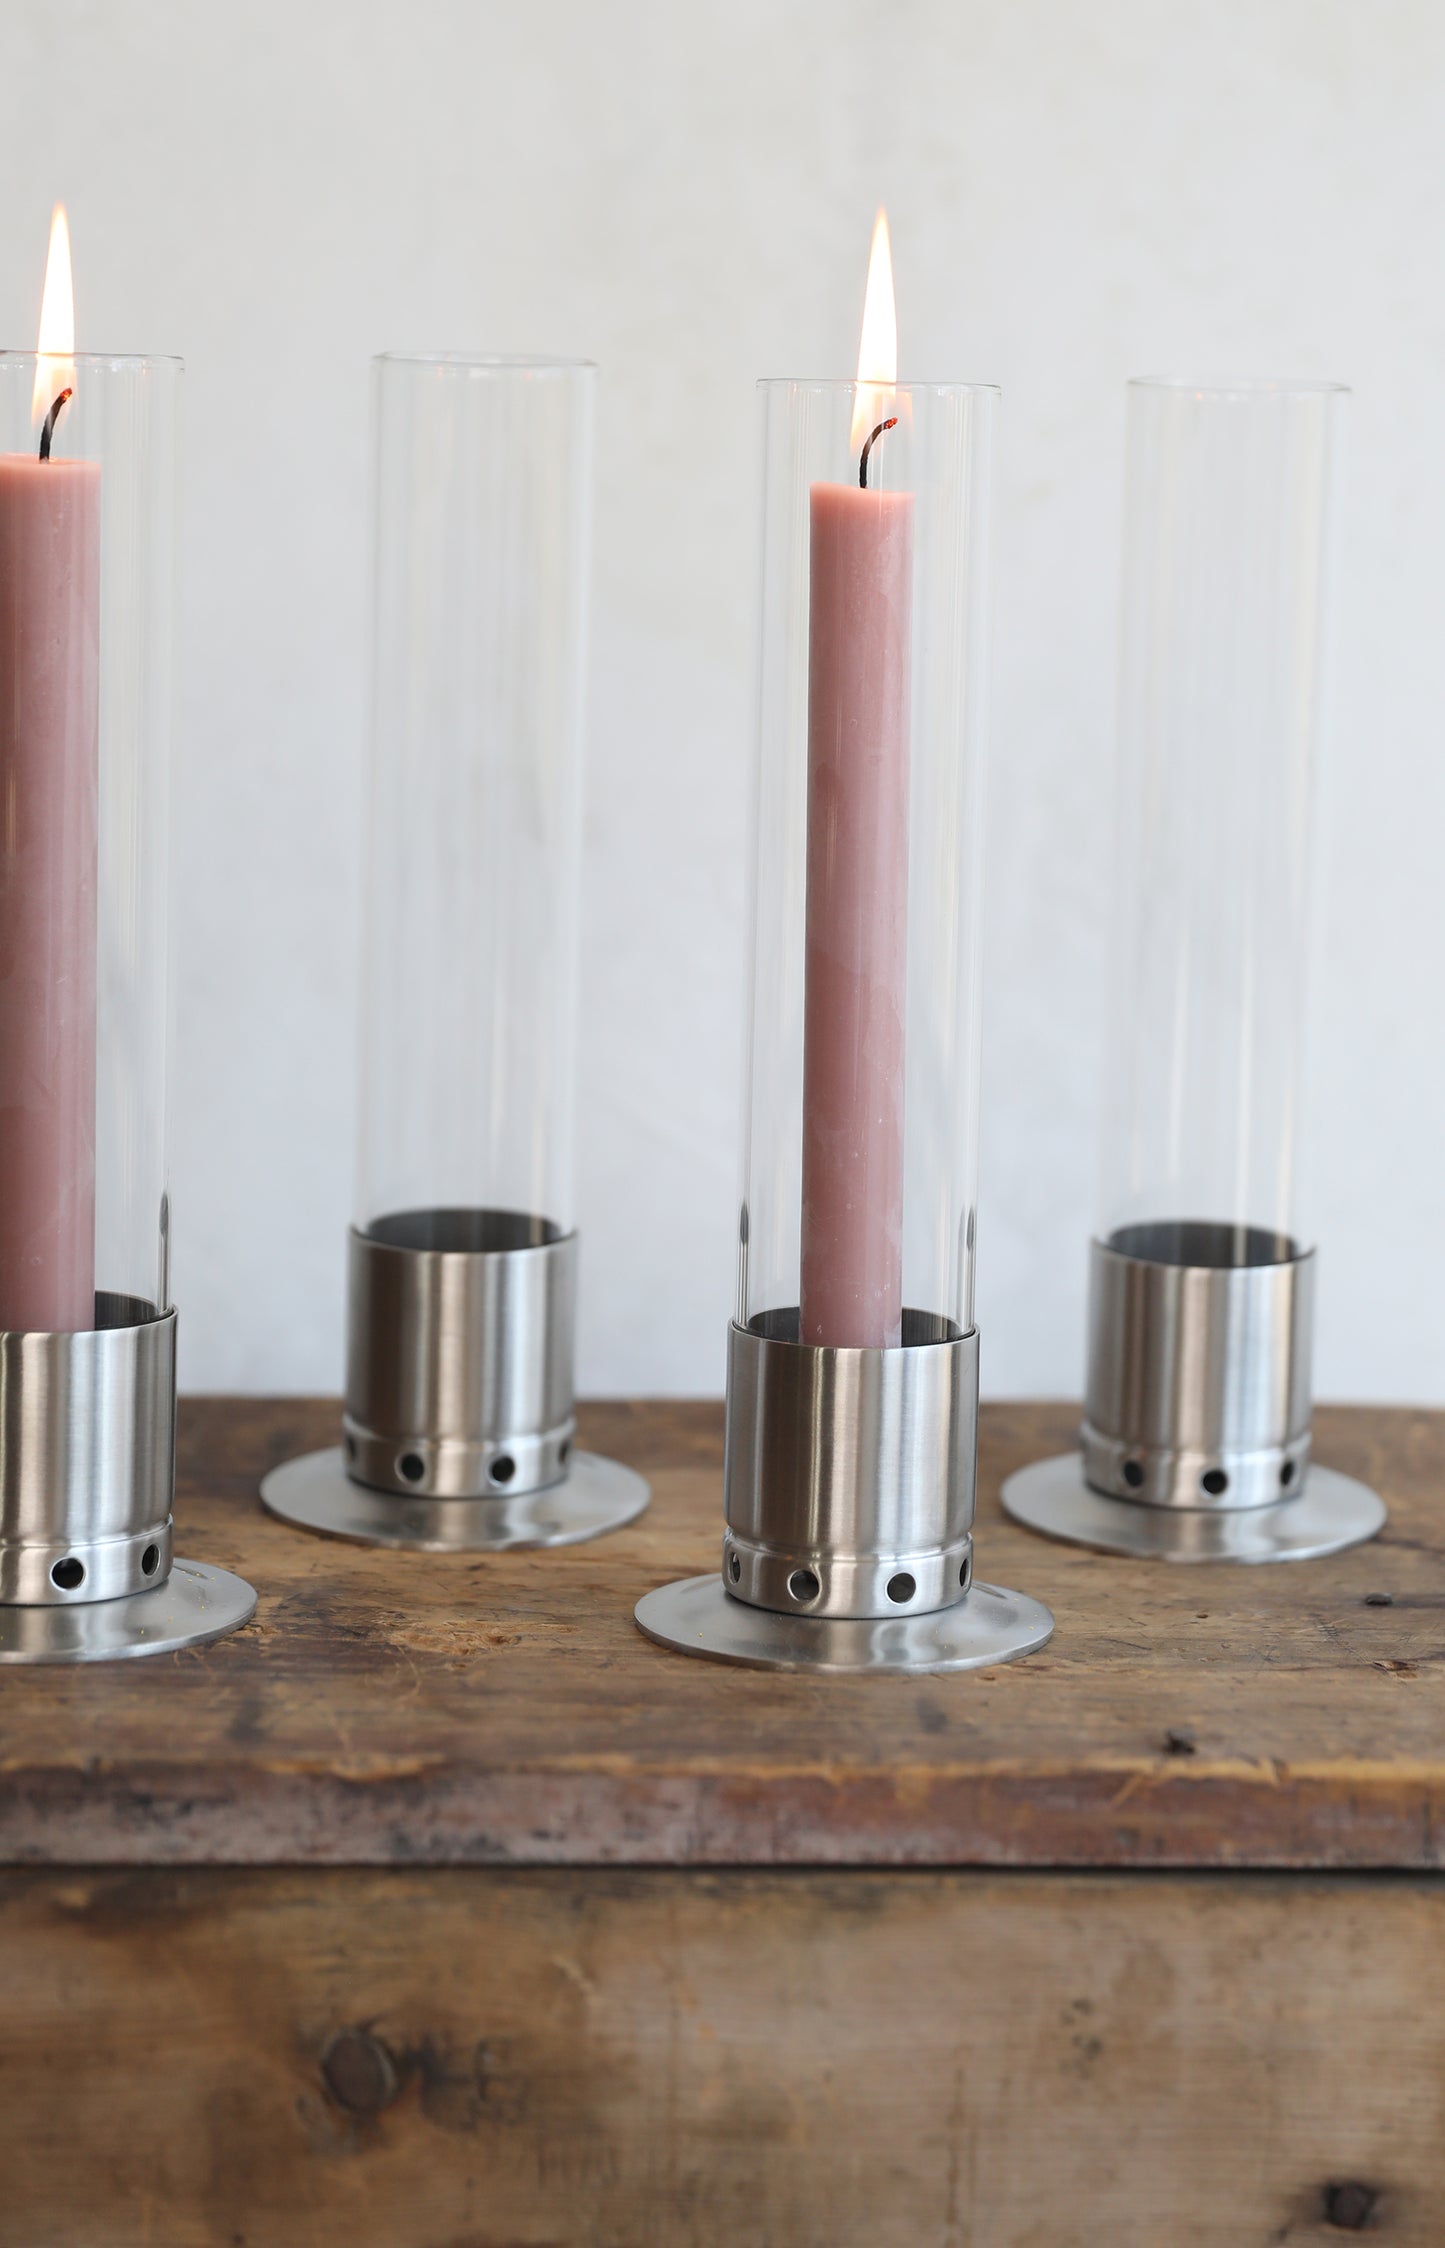 Stainless Steel Candle Holder